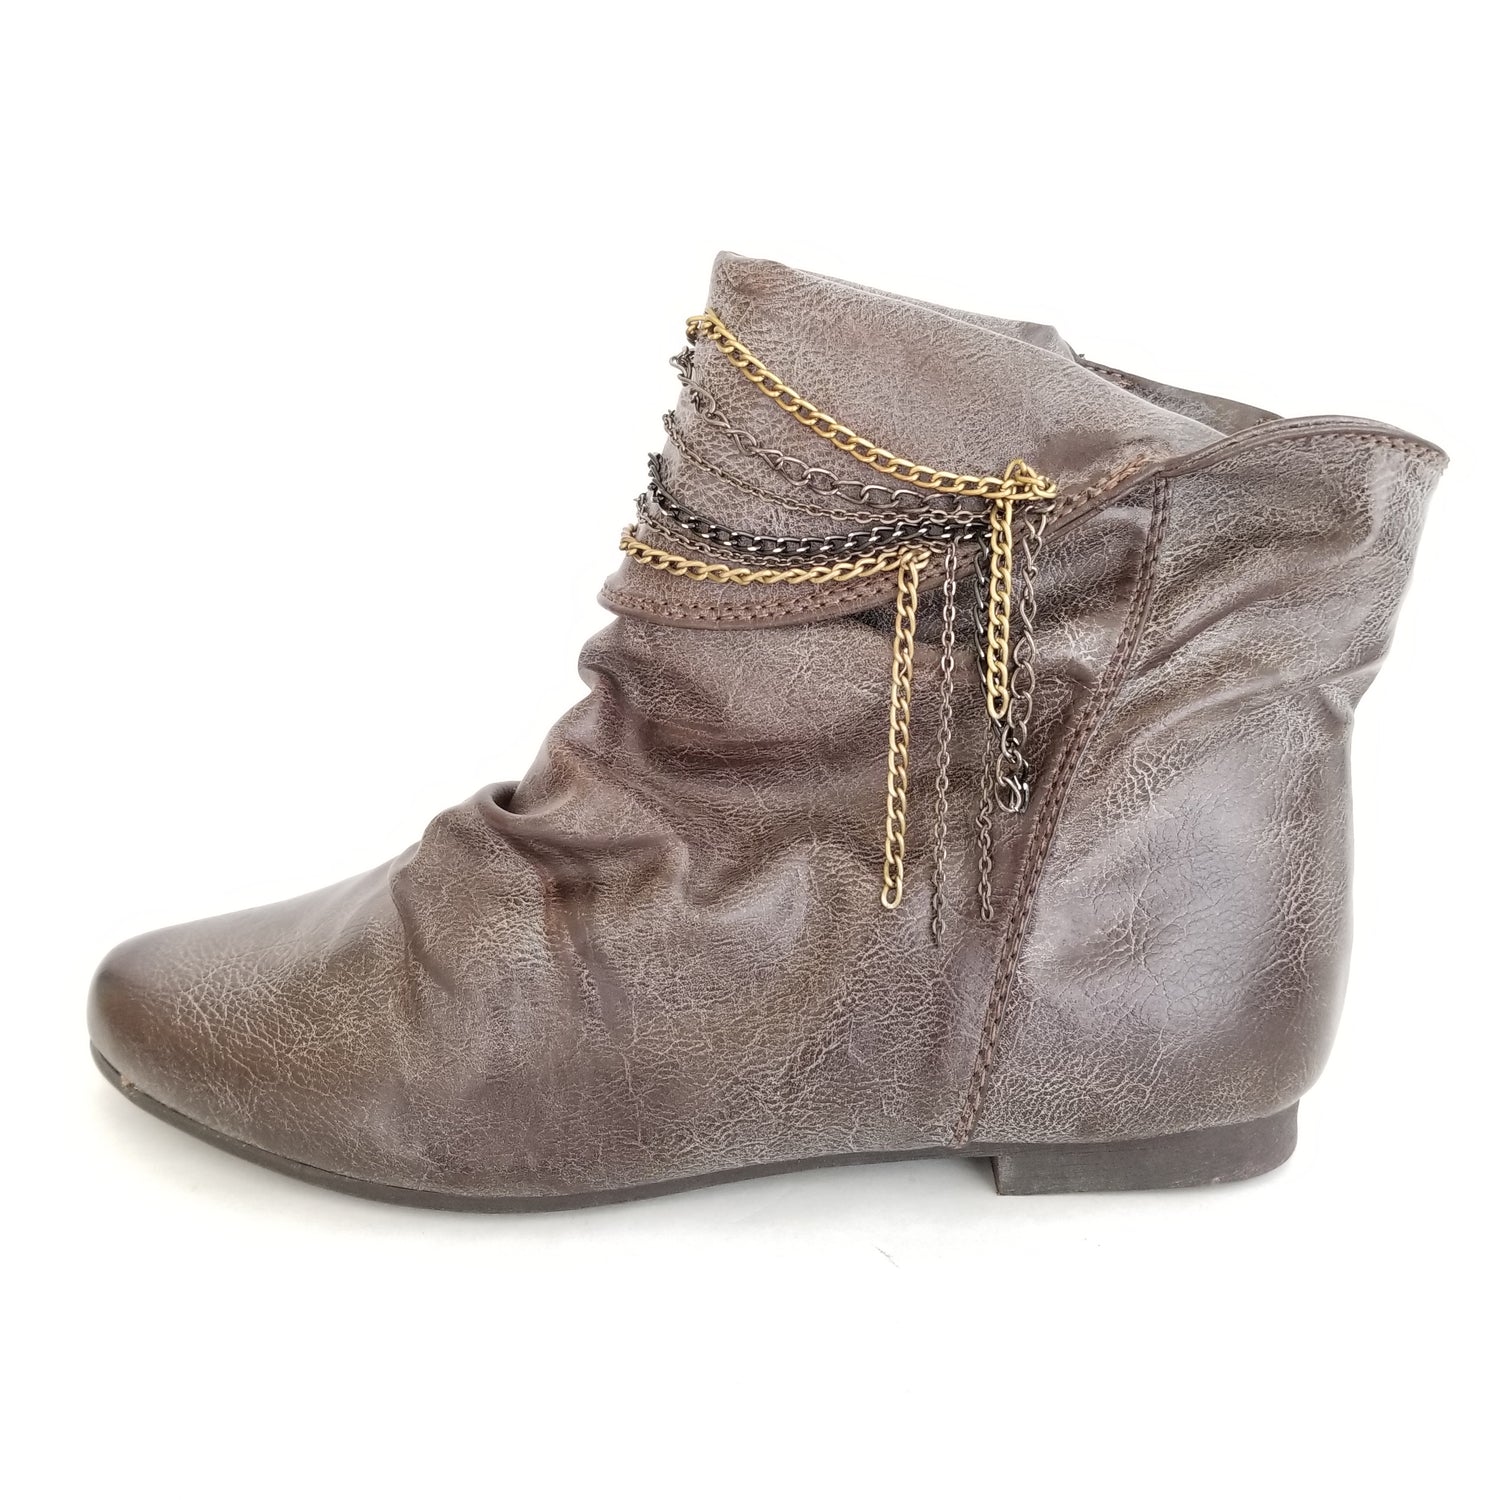 Leah distressed faux leather boots - Didi Royale